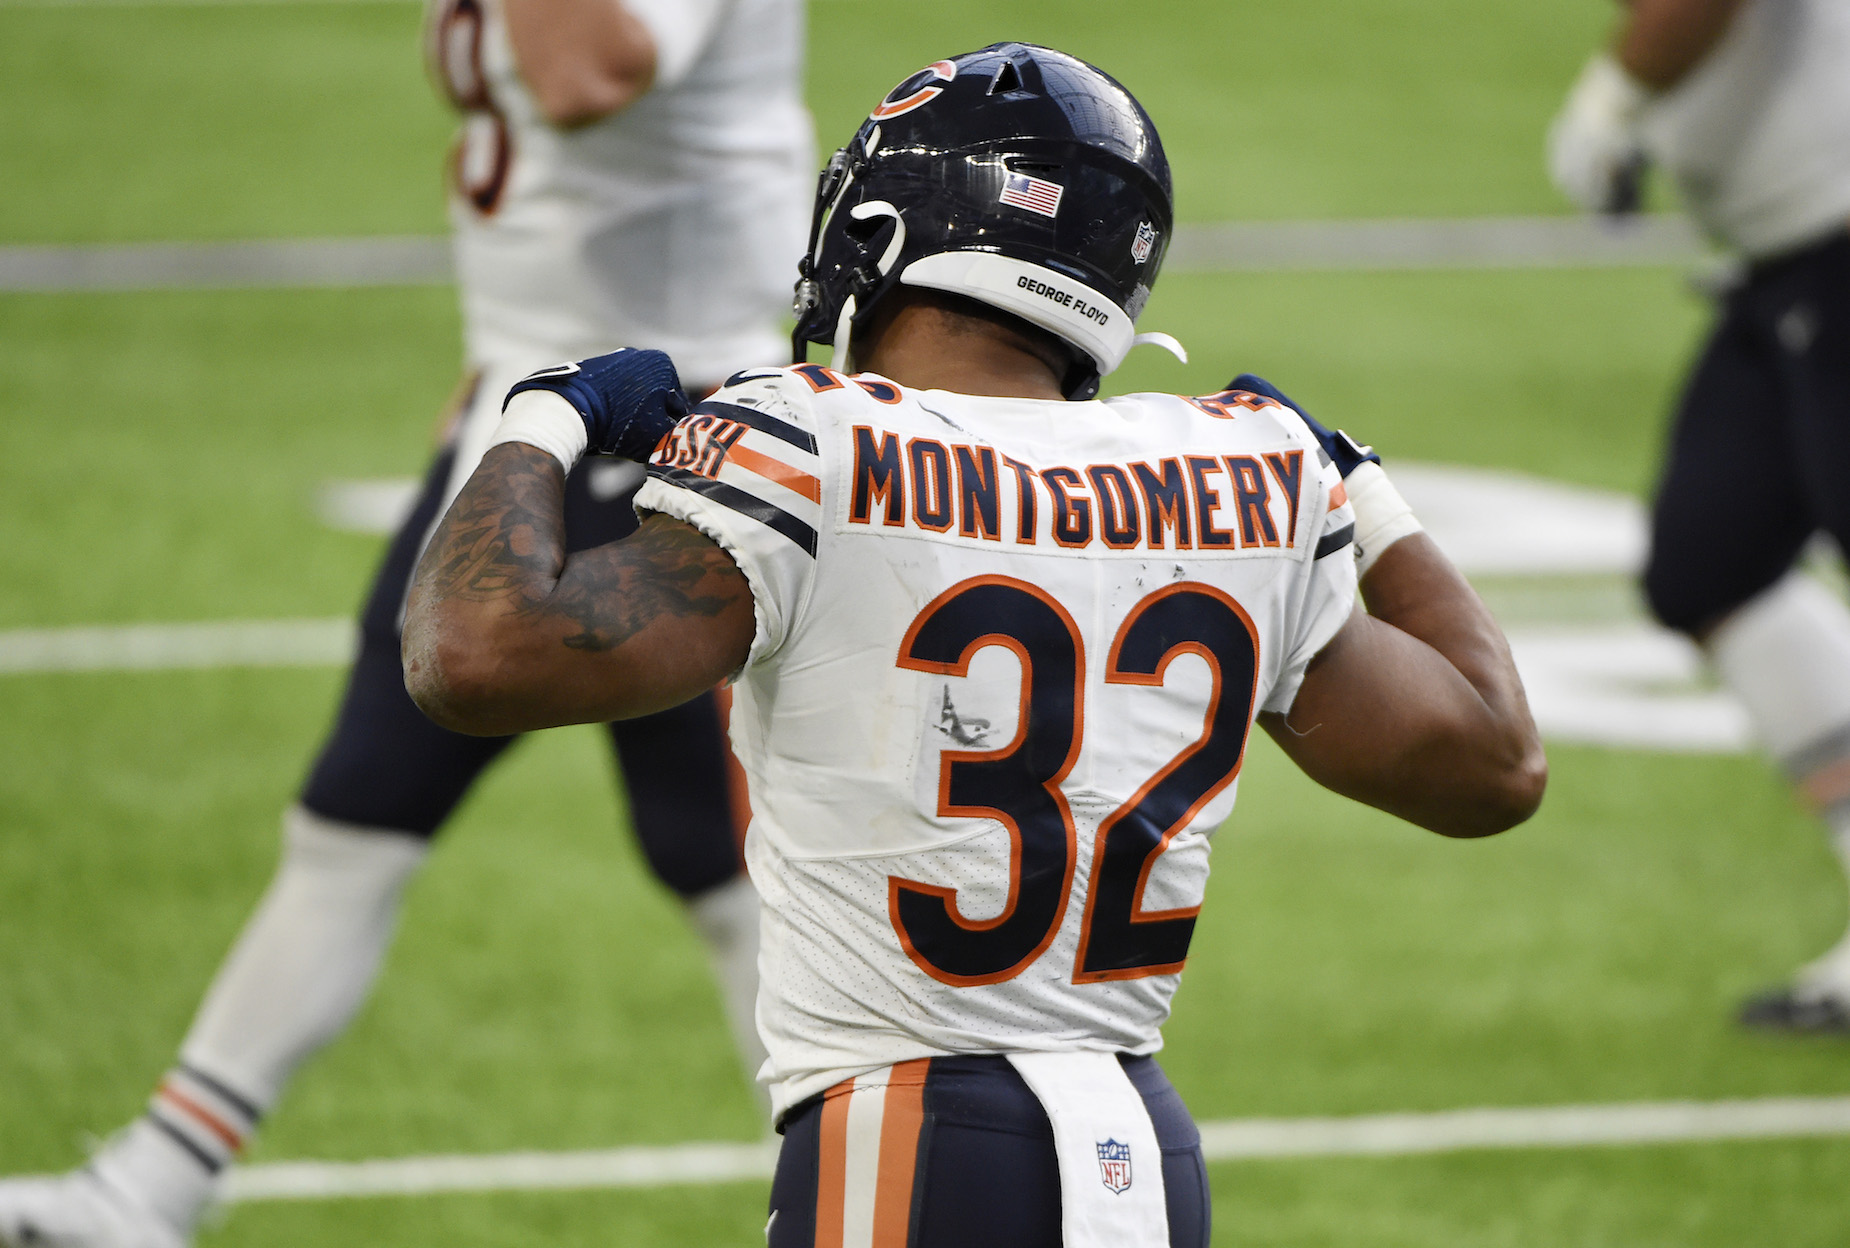 Chicago Bears running back David Montgomery overcame a pretty tough childhood en route to the NFL.